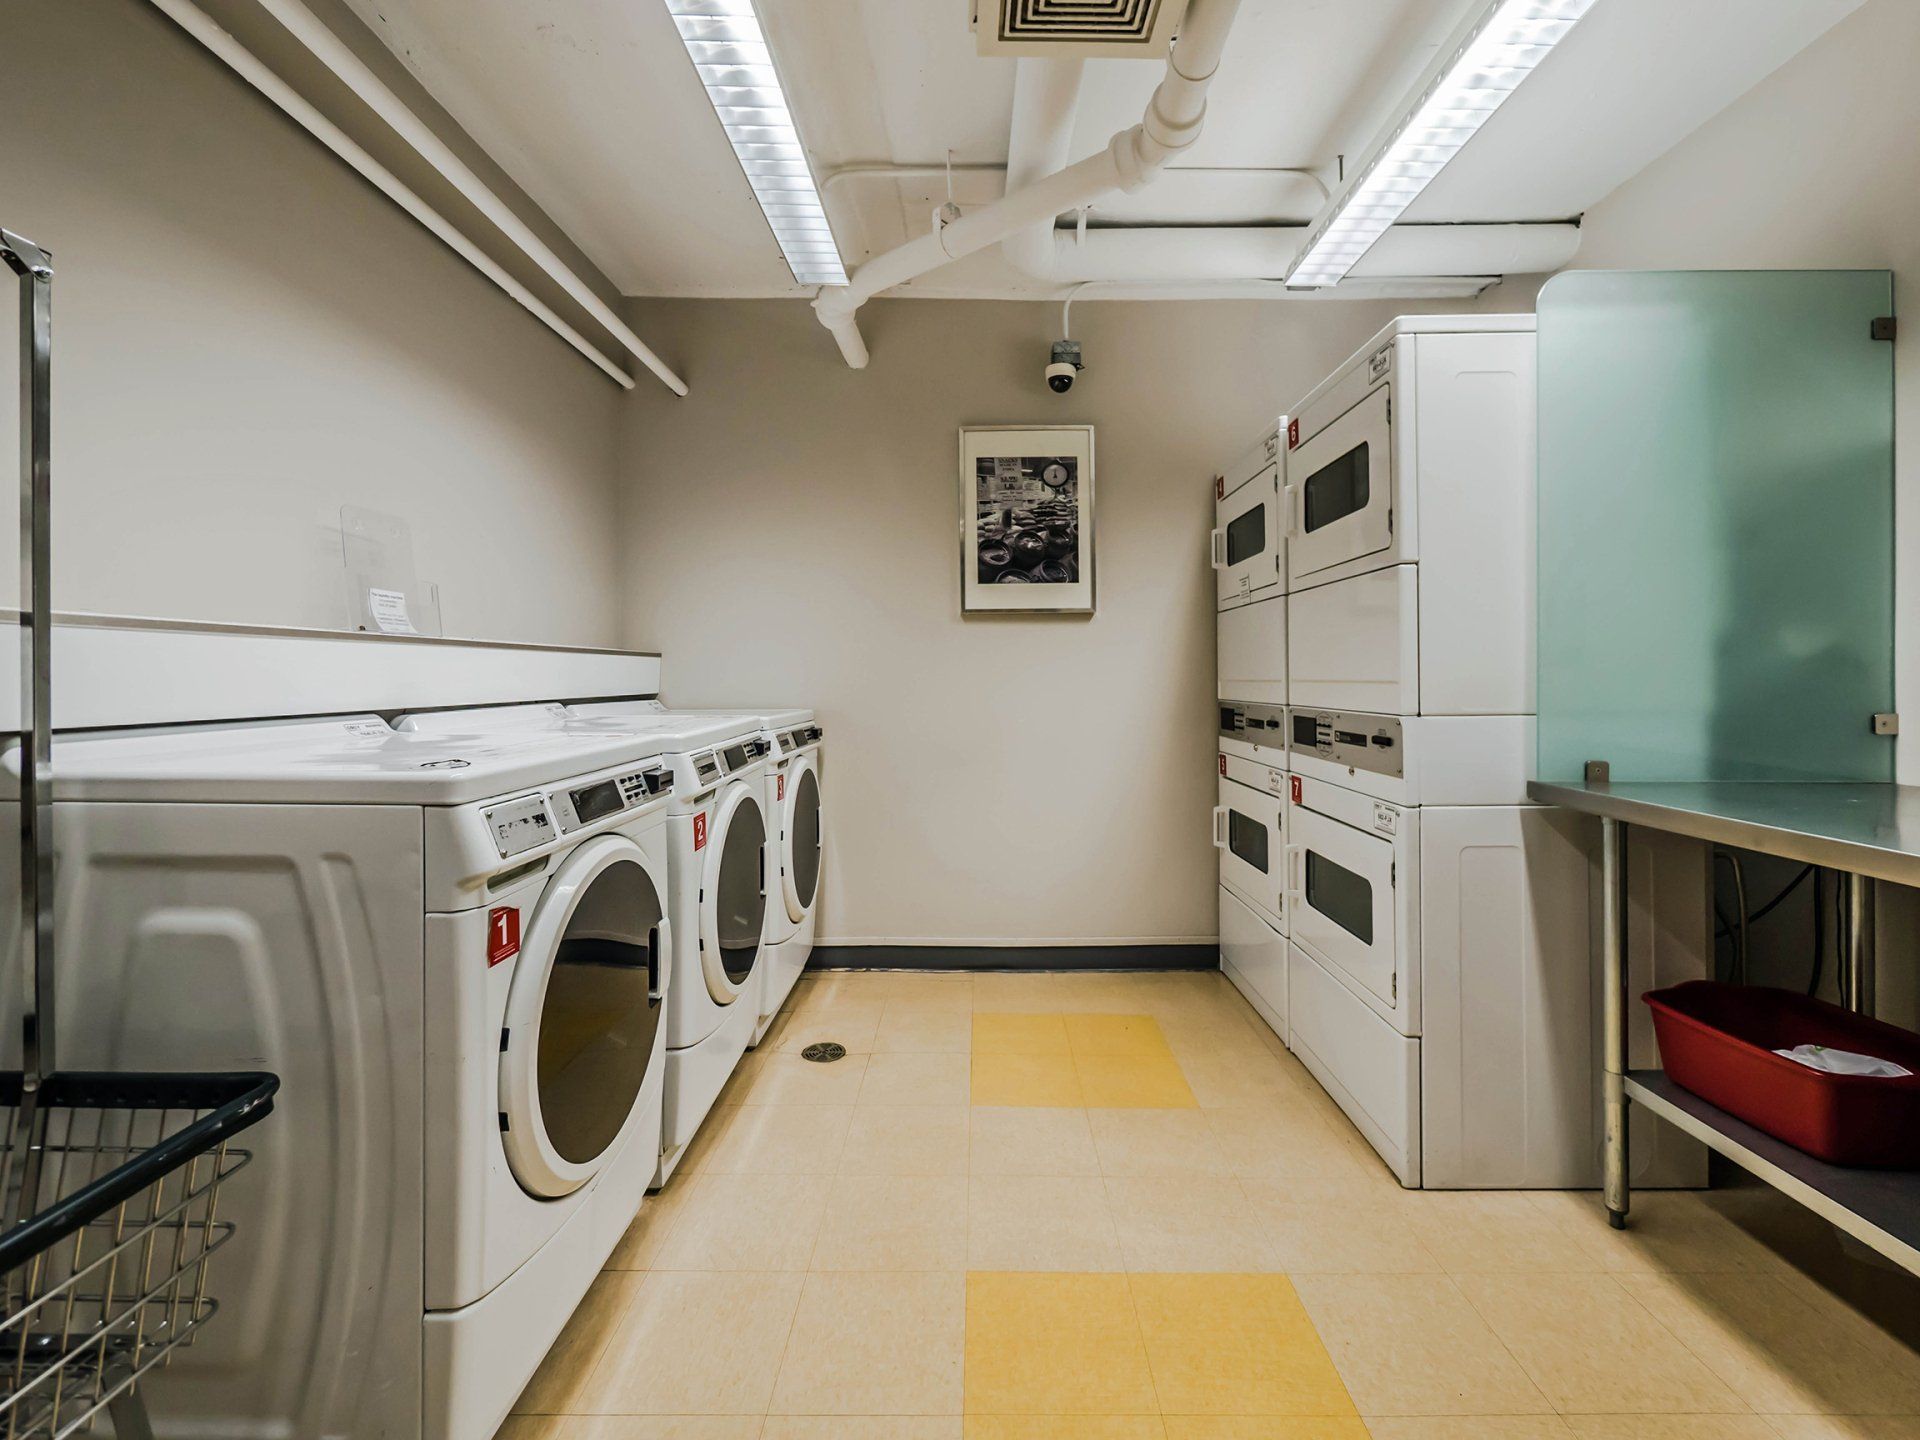 A laundry room with a lot of washers and dryers at Reside on Morse.